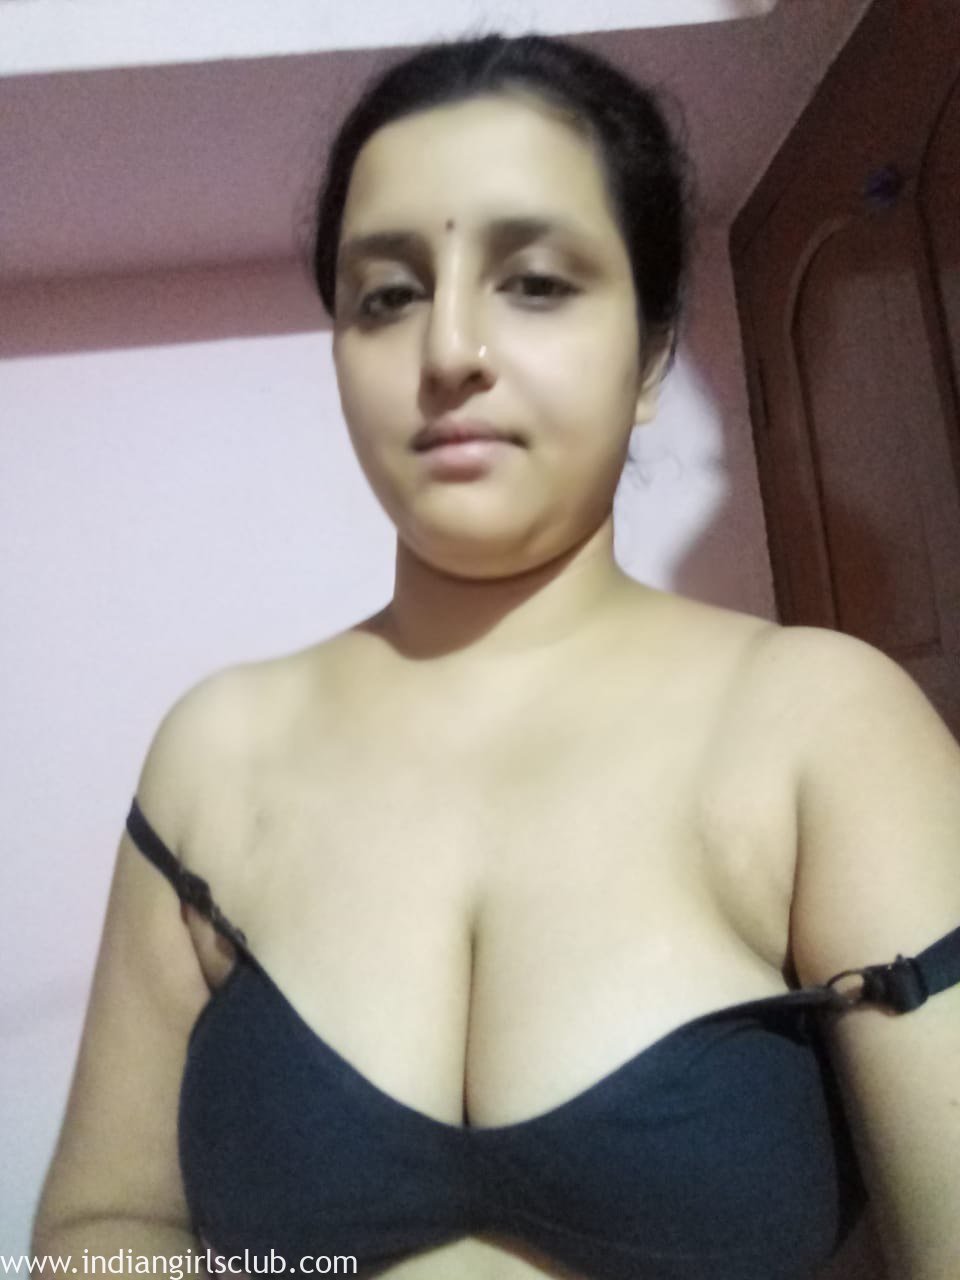 big-tits-bengali-indian-housewife-ready-for-hot-sex-20 - Indian Girls Club  pic